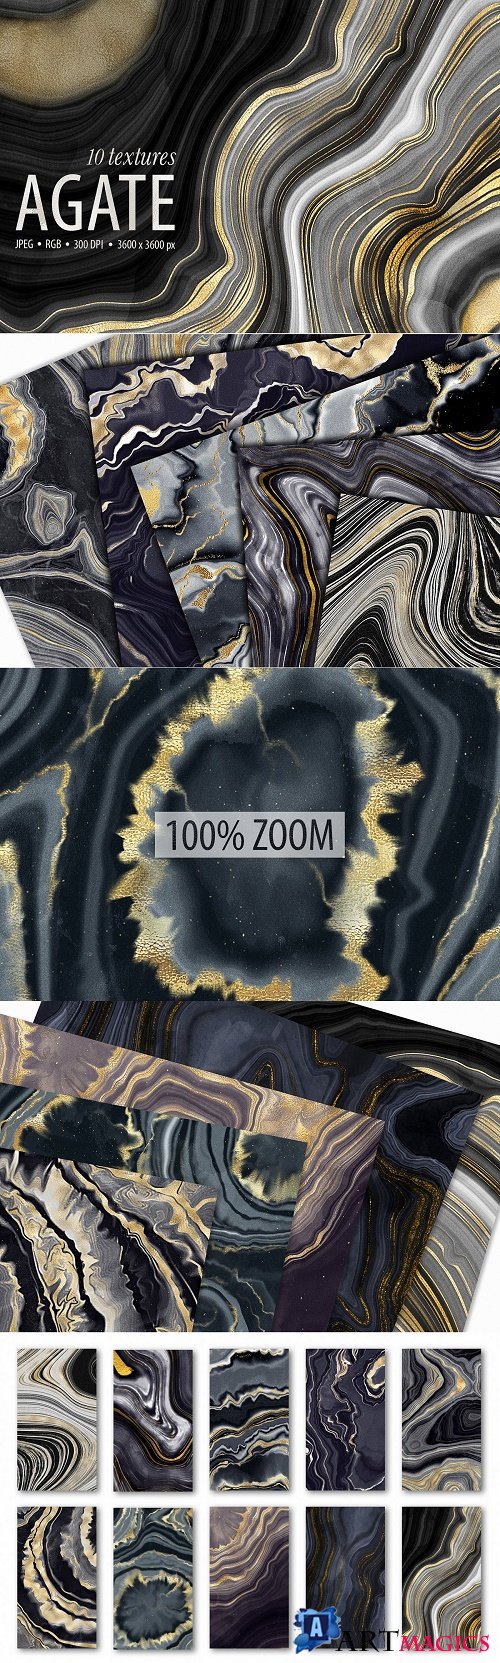 Gold Veined Agate Stone Textures - 3672378